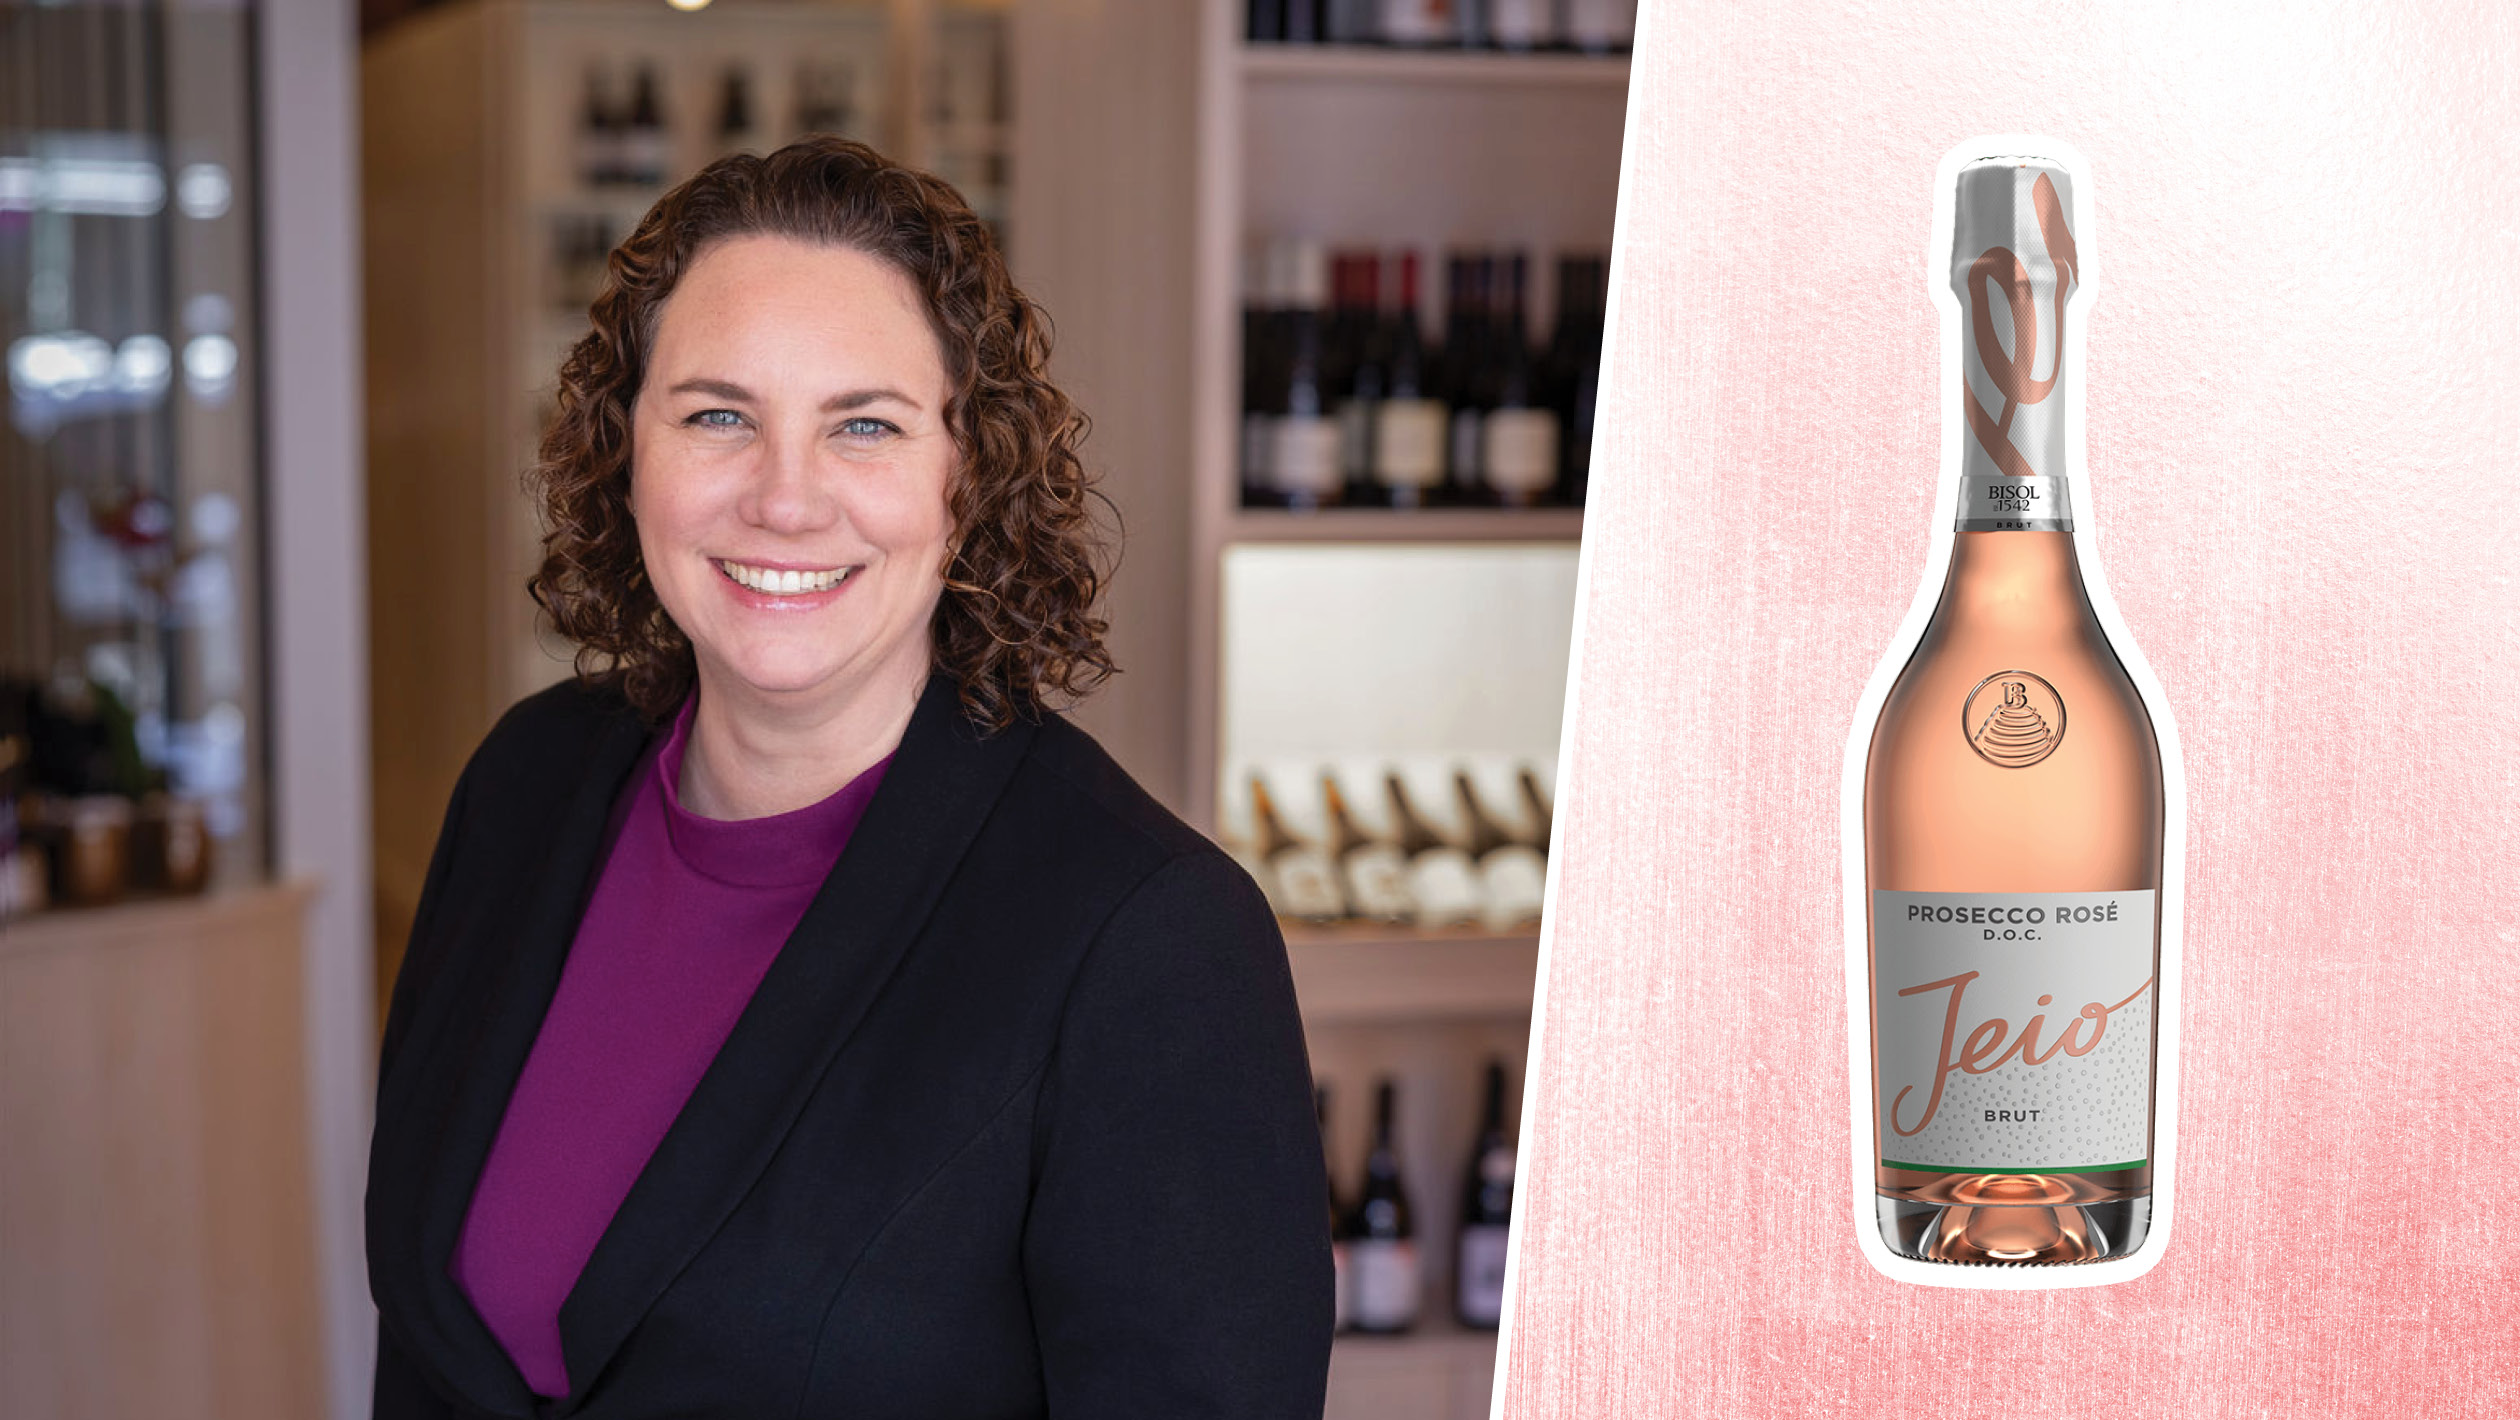 From left to right: Kathryn House McClaskey, the founder of House of Wine (photo by Byron Mason); Bisol ‘Jeio’ Prosecco Rosé NV (photo courtesy of Wilson Daniels).